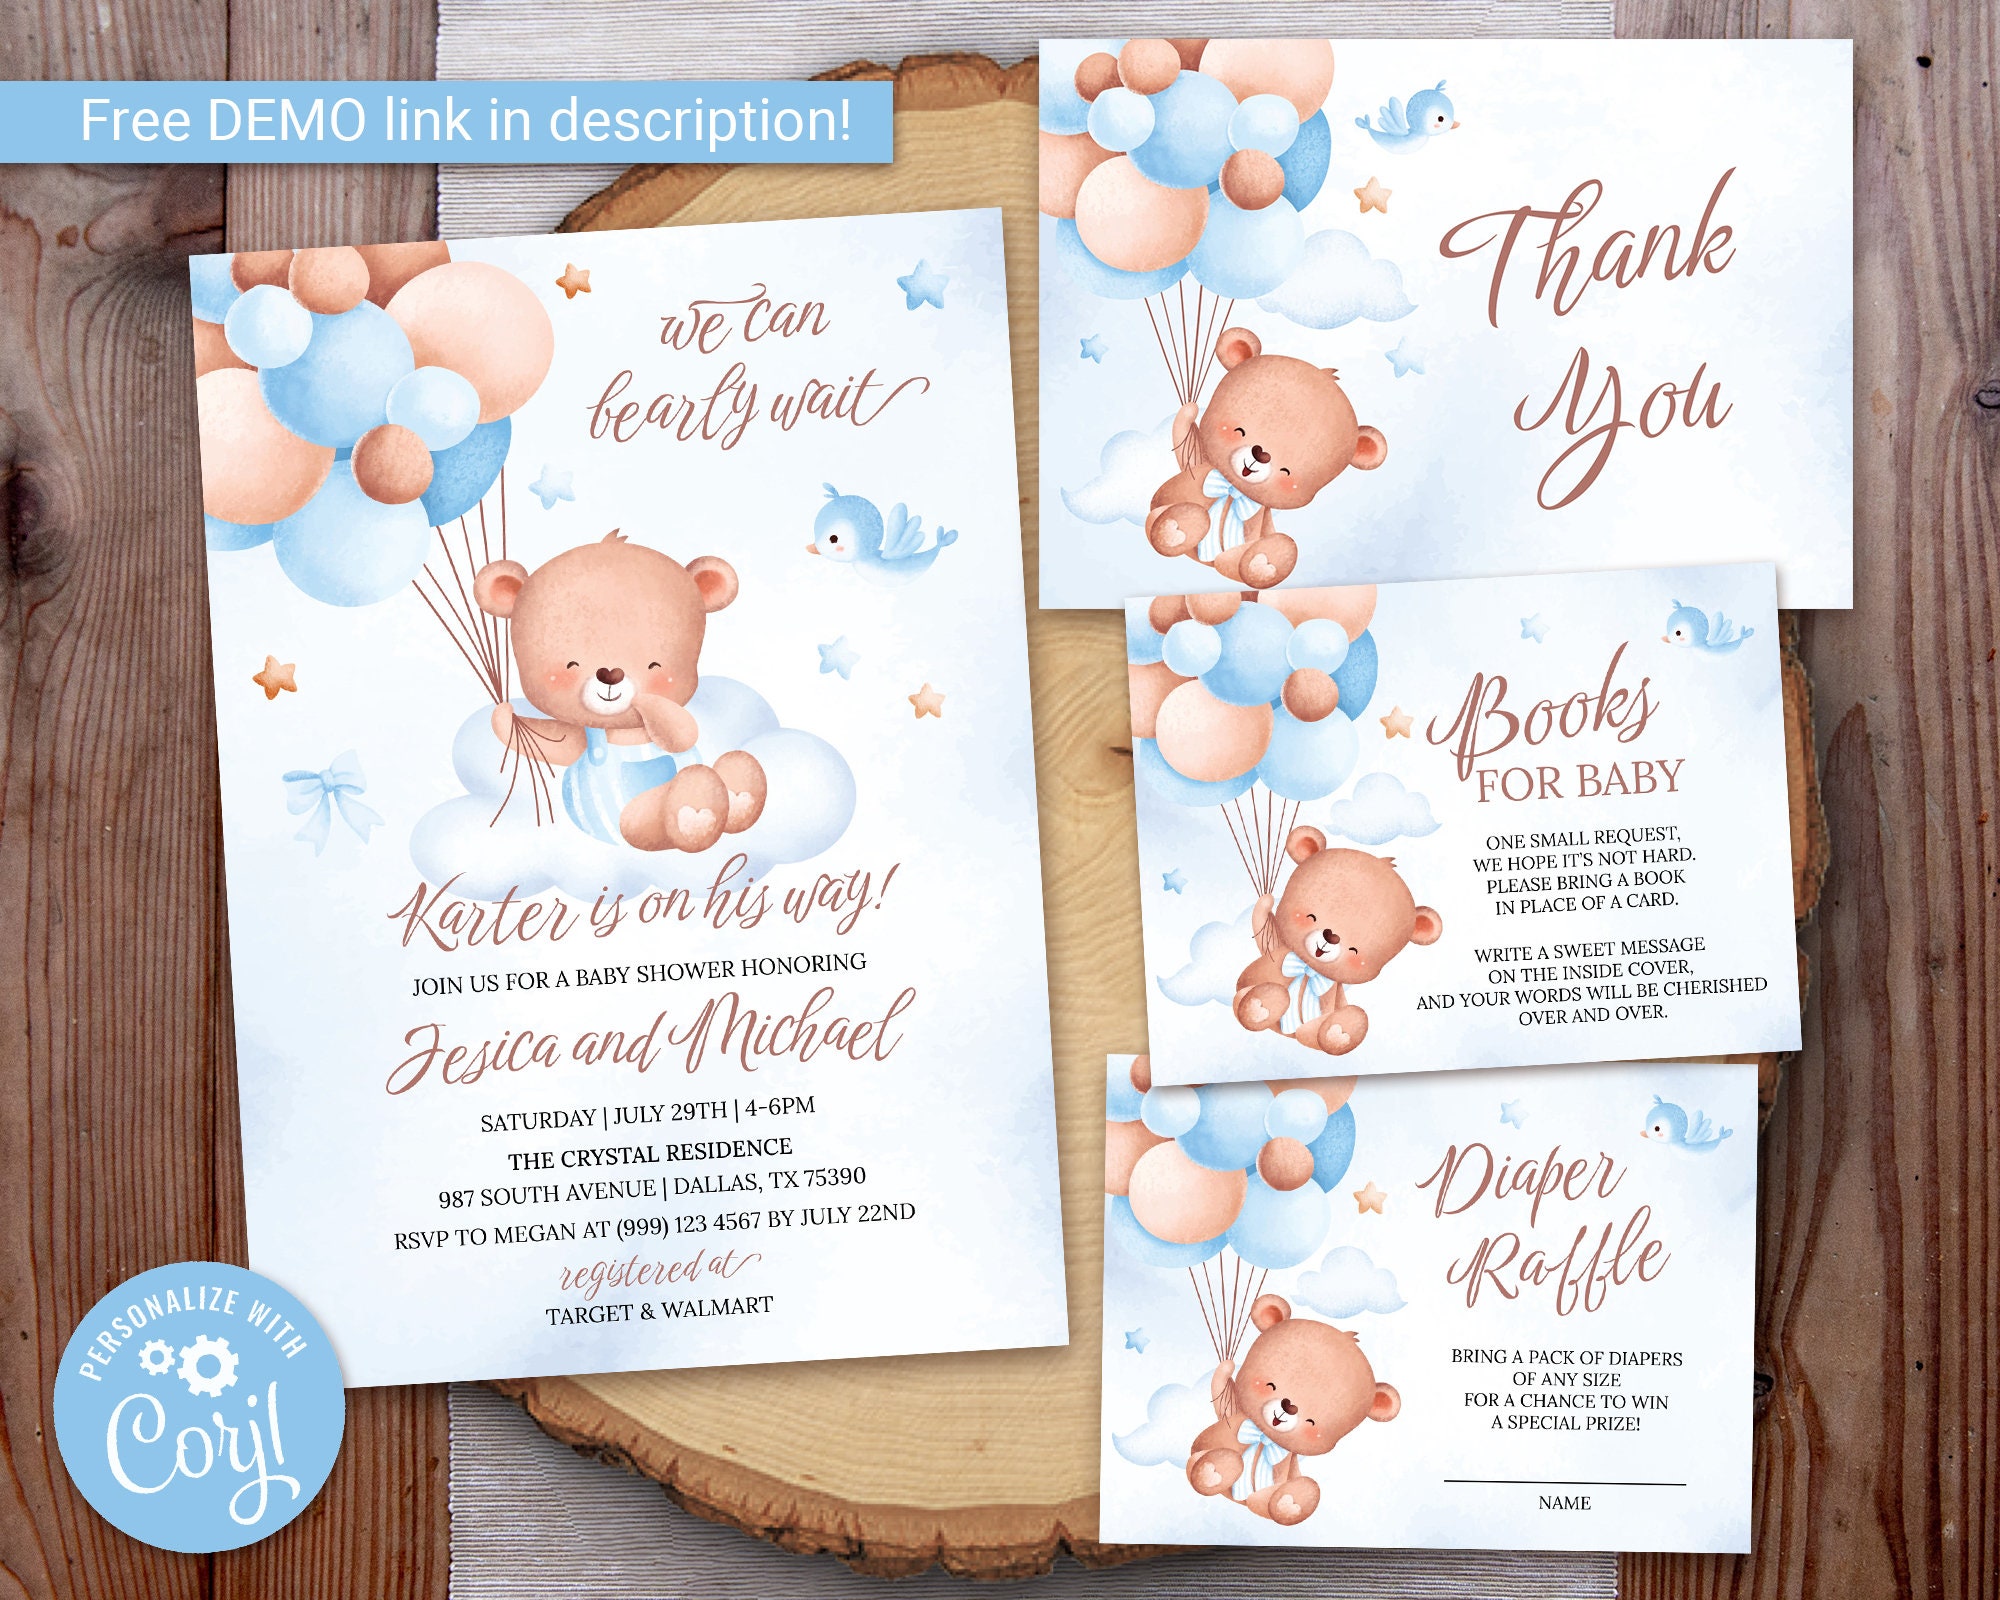 Bearly Wait Baby Shower Invite Template Blue Bear Baby Shower 